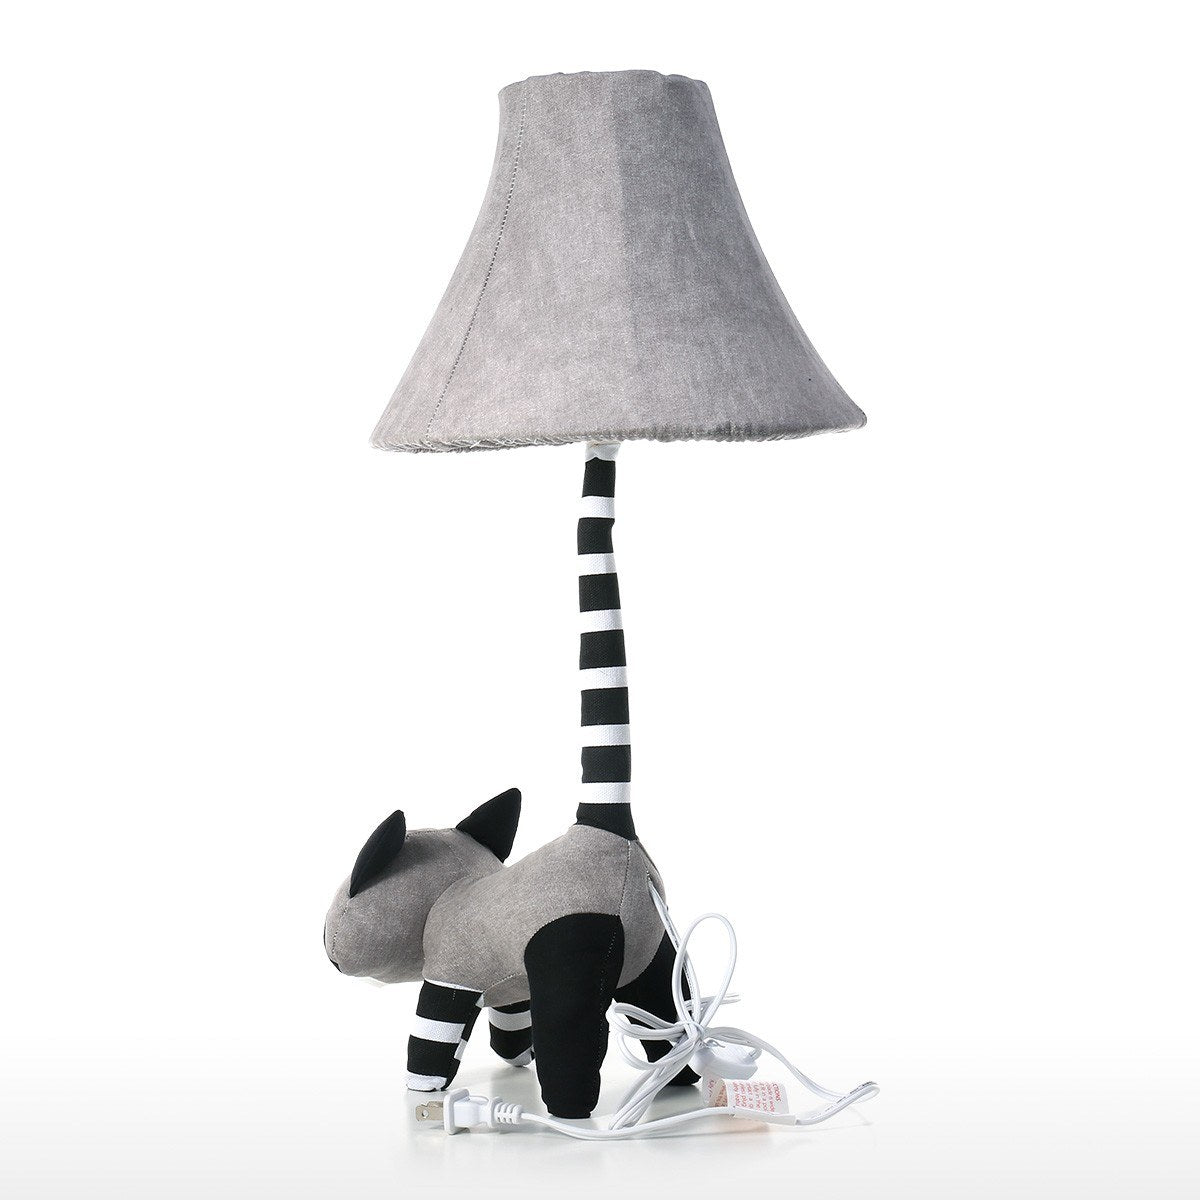 Black and White Cute Raccoon Decor with Table Lamp for Nursery Decor